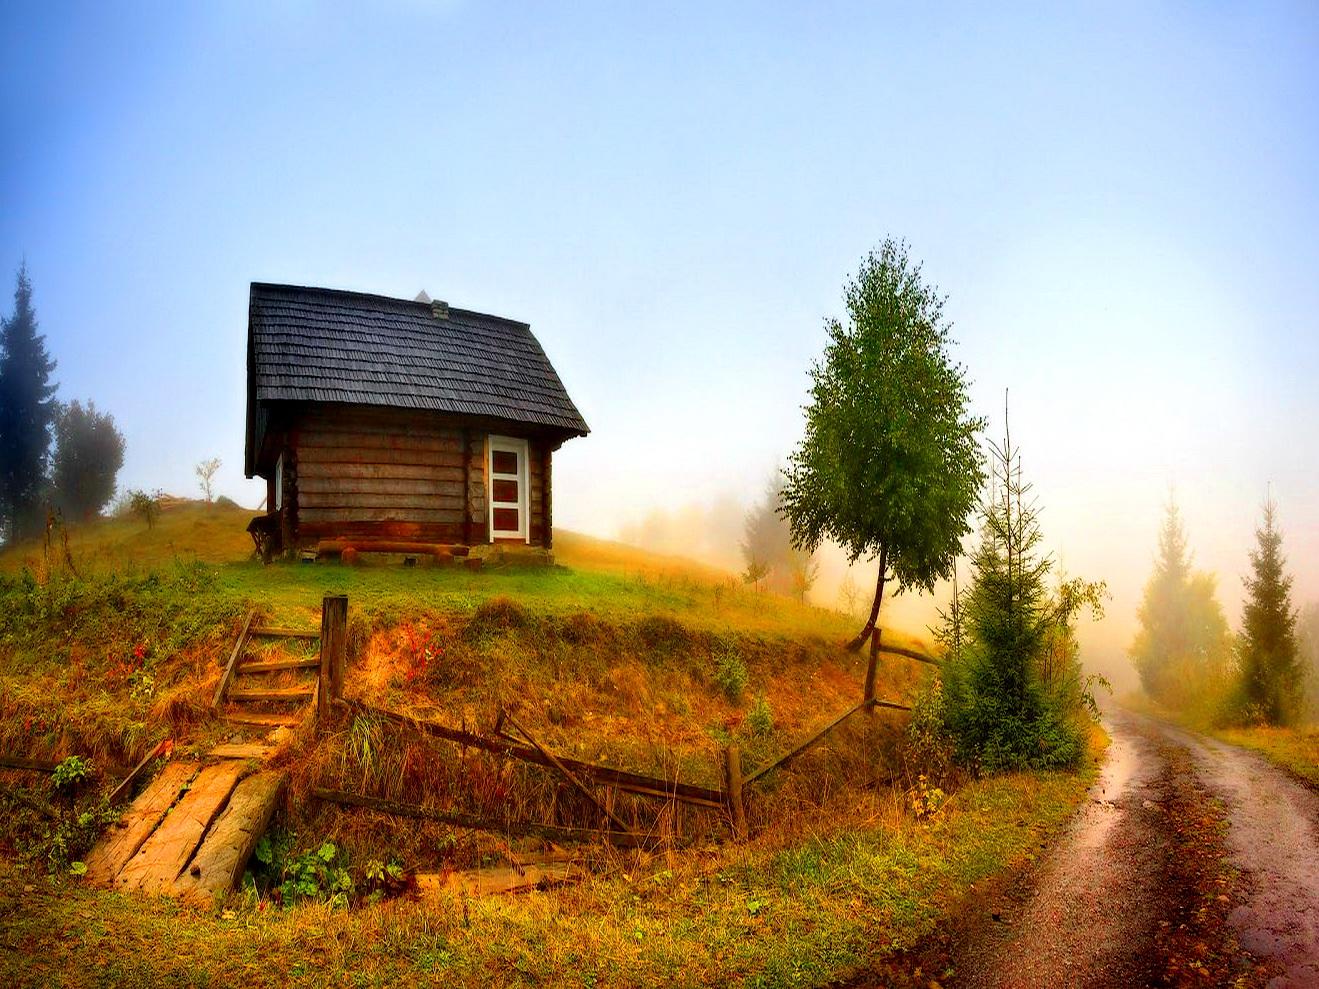 Country Homes Wallpaper